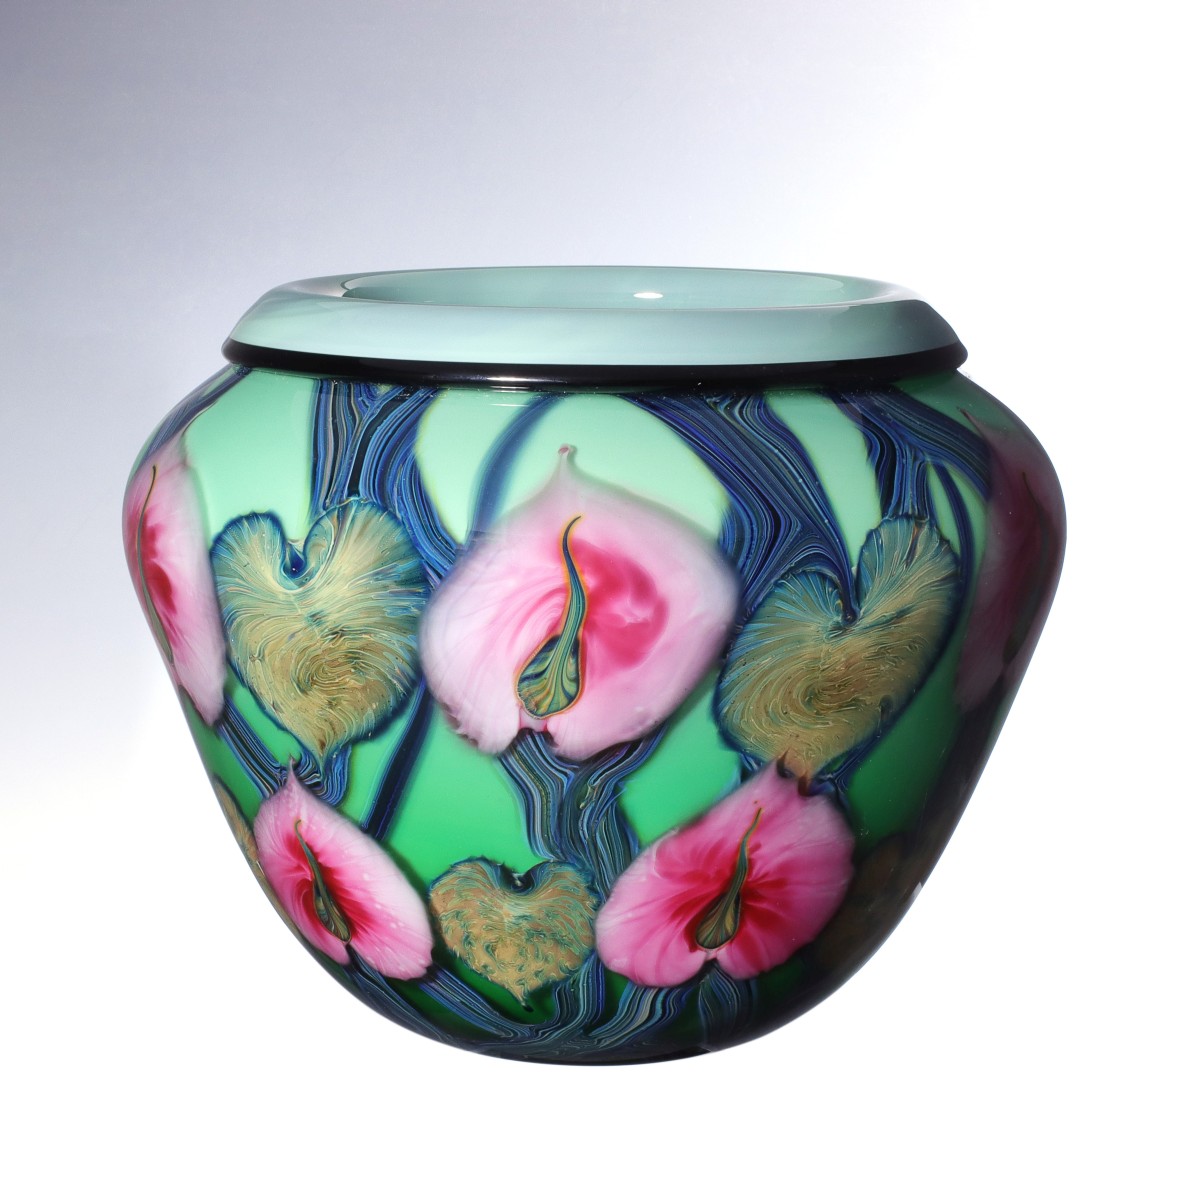 A DAVID LOTTON ART GLASS VASE WITH PINK ANTHURIUMS